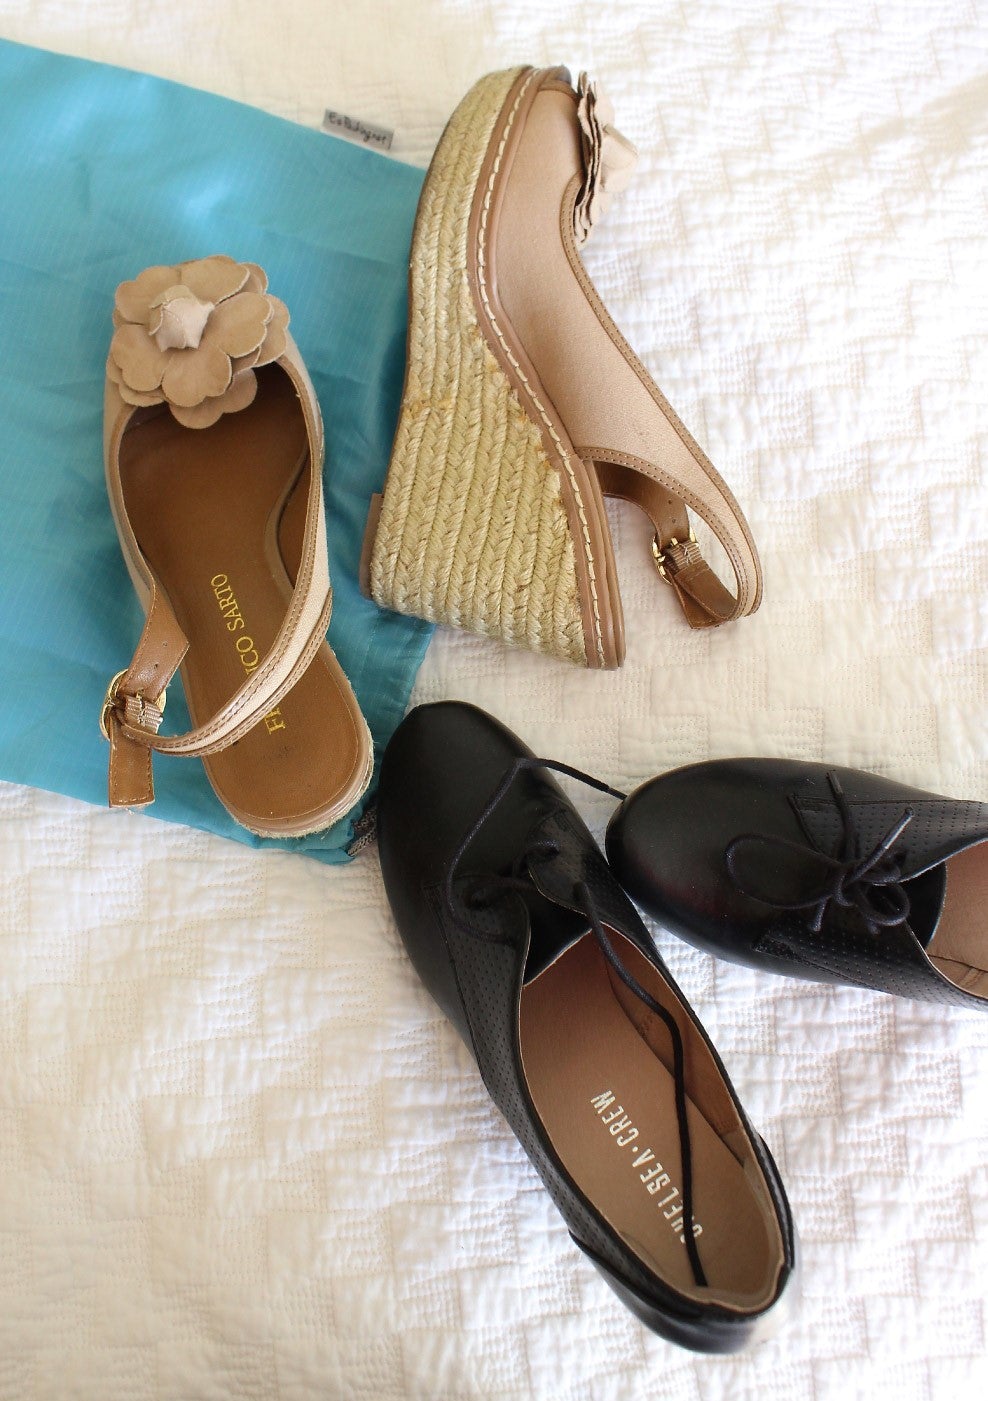 Heels and Wedges in Occasion